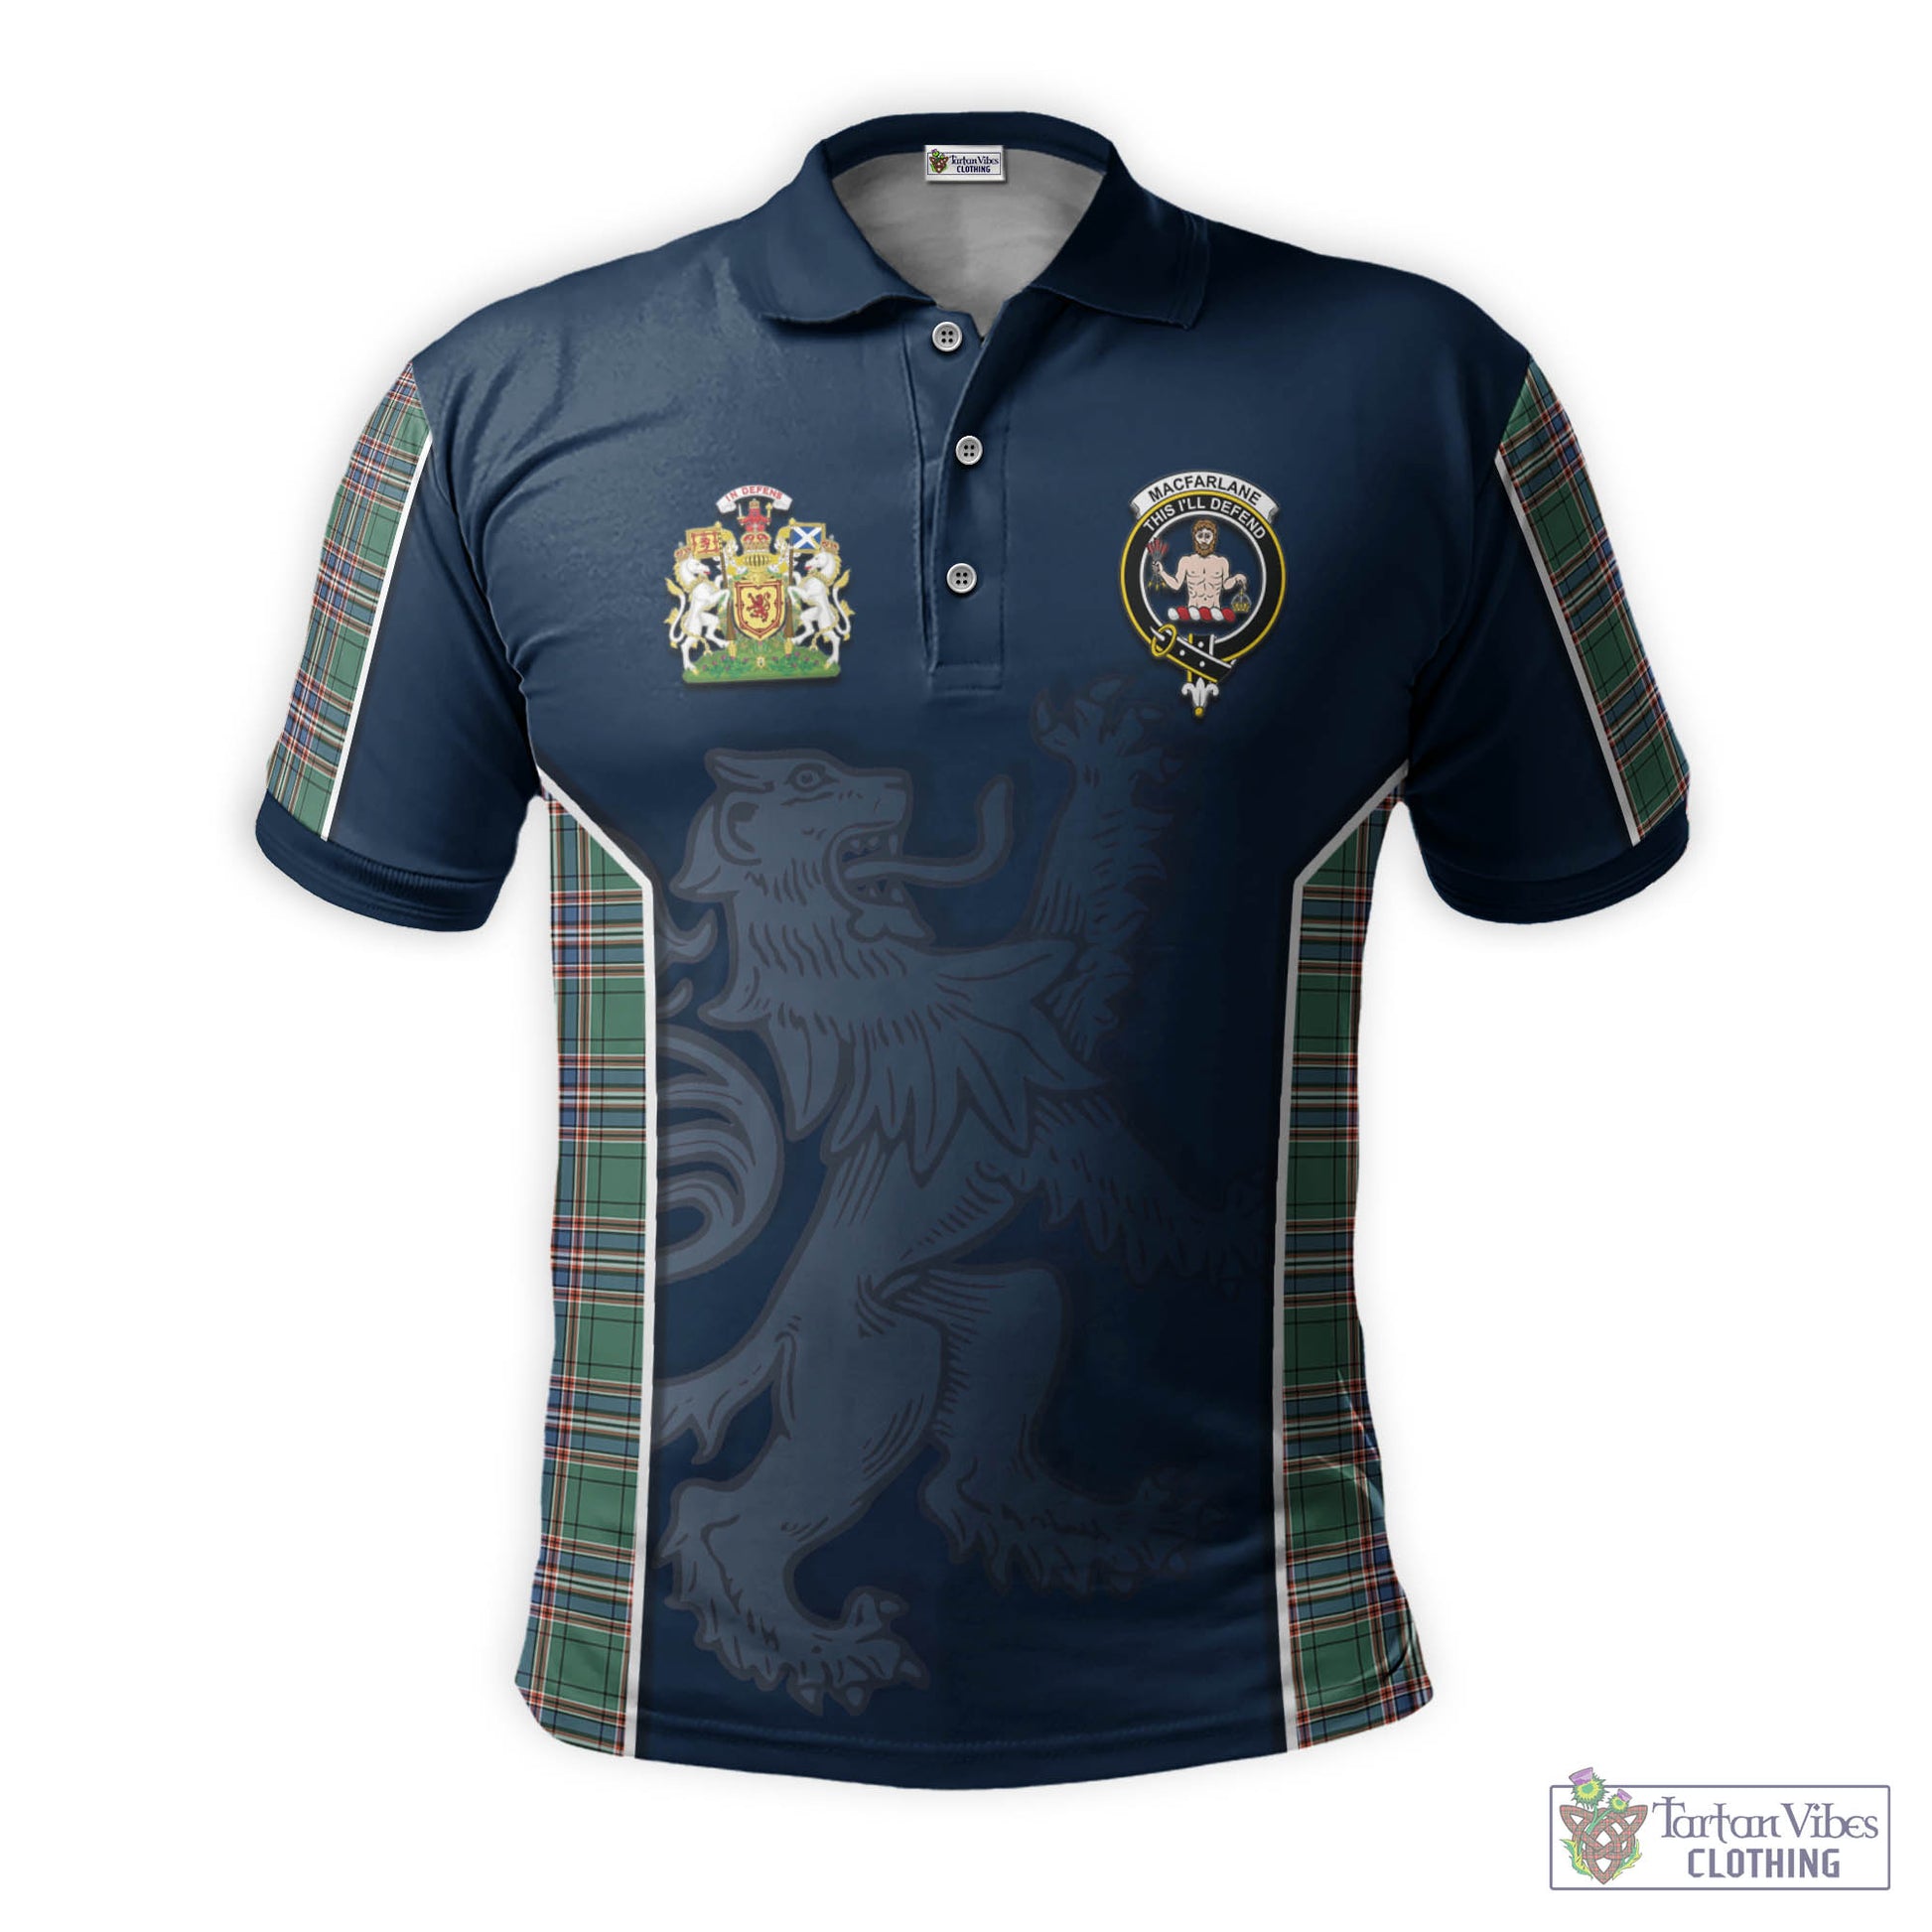 Tartan Vibes Clothing MacFarlane Hunting Ancient Tartan Men's Polo Shirt with Family Crest and Lion Rampant Vibes Sport Style